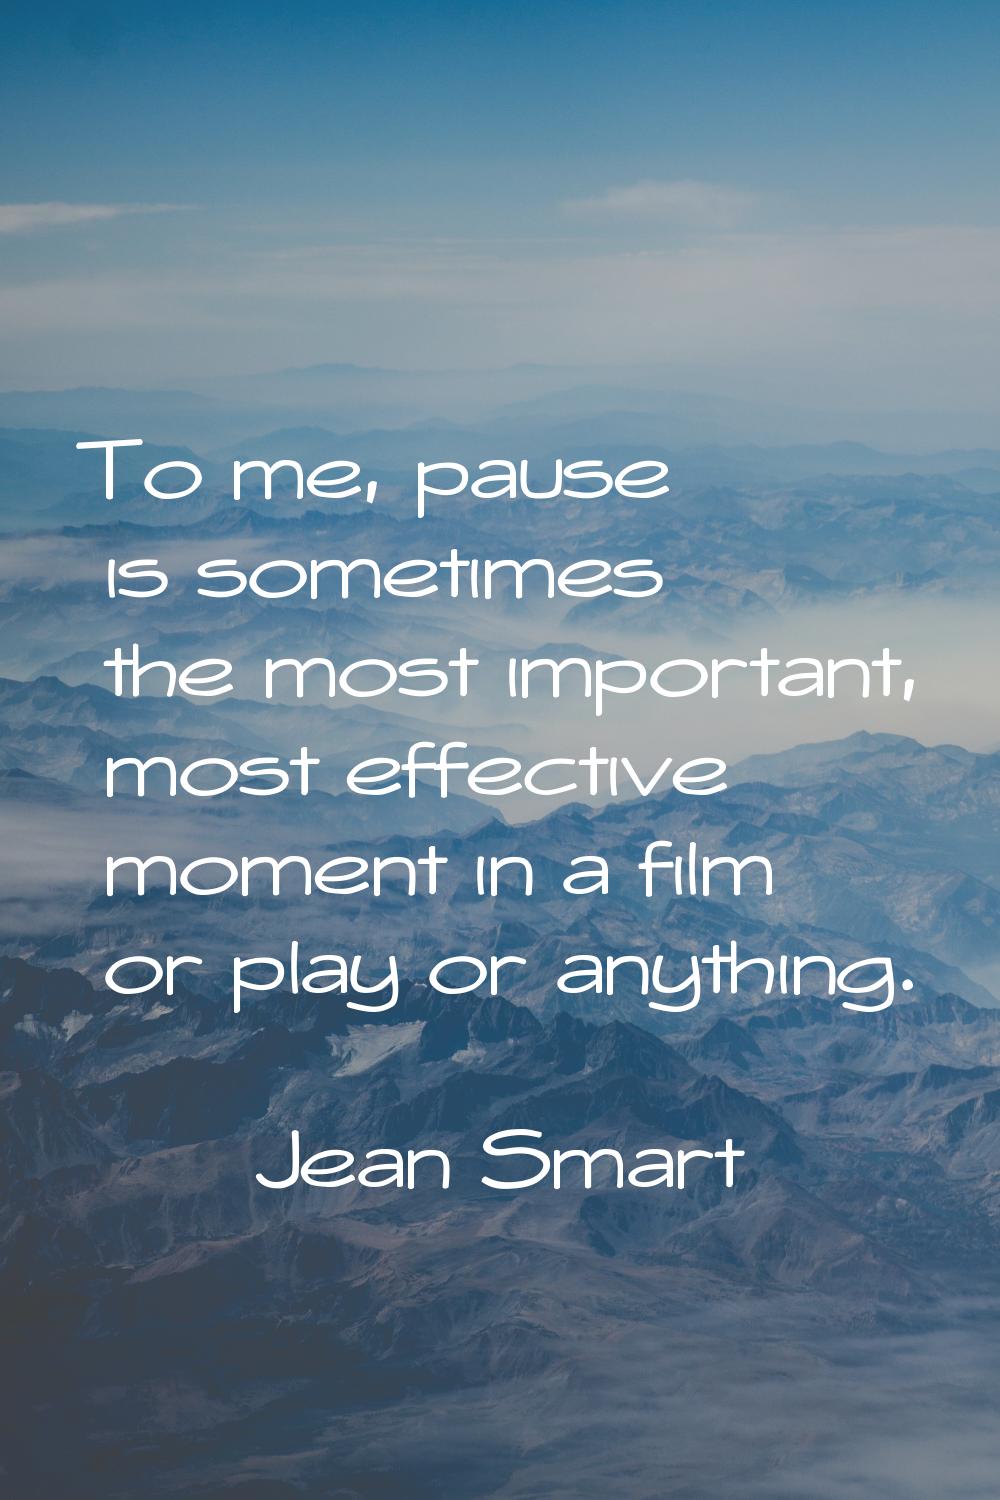 To me, pause is sometimes the most important, most effective moment in a film or play or anything.